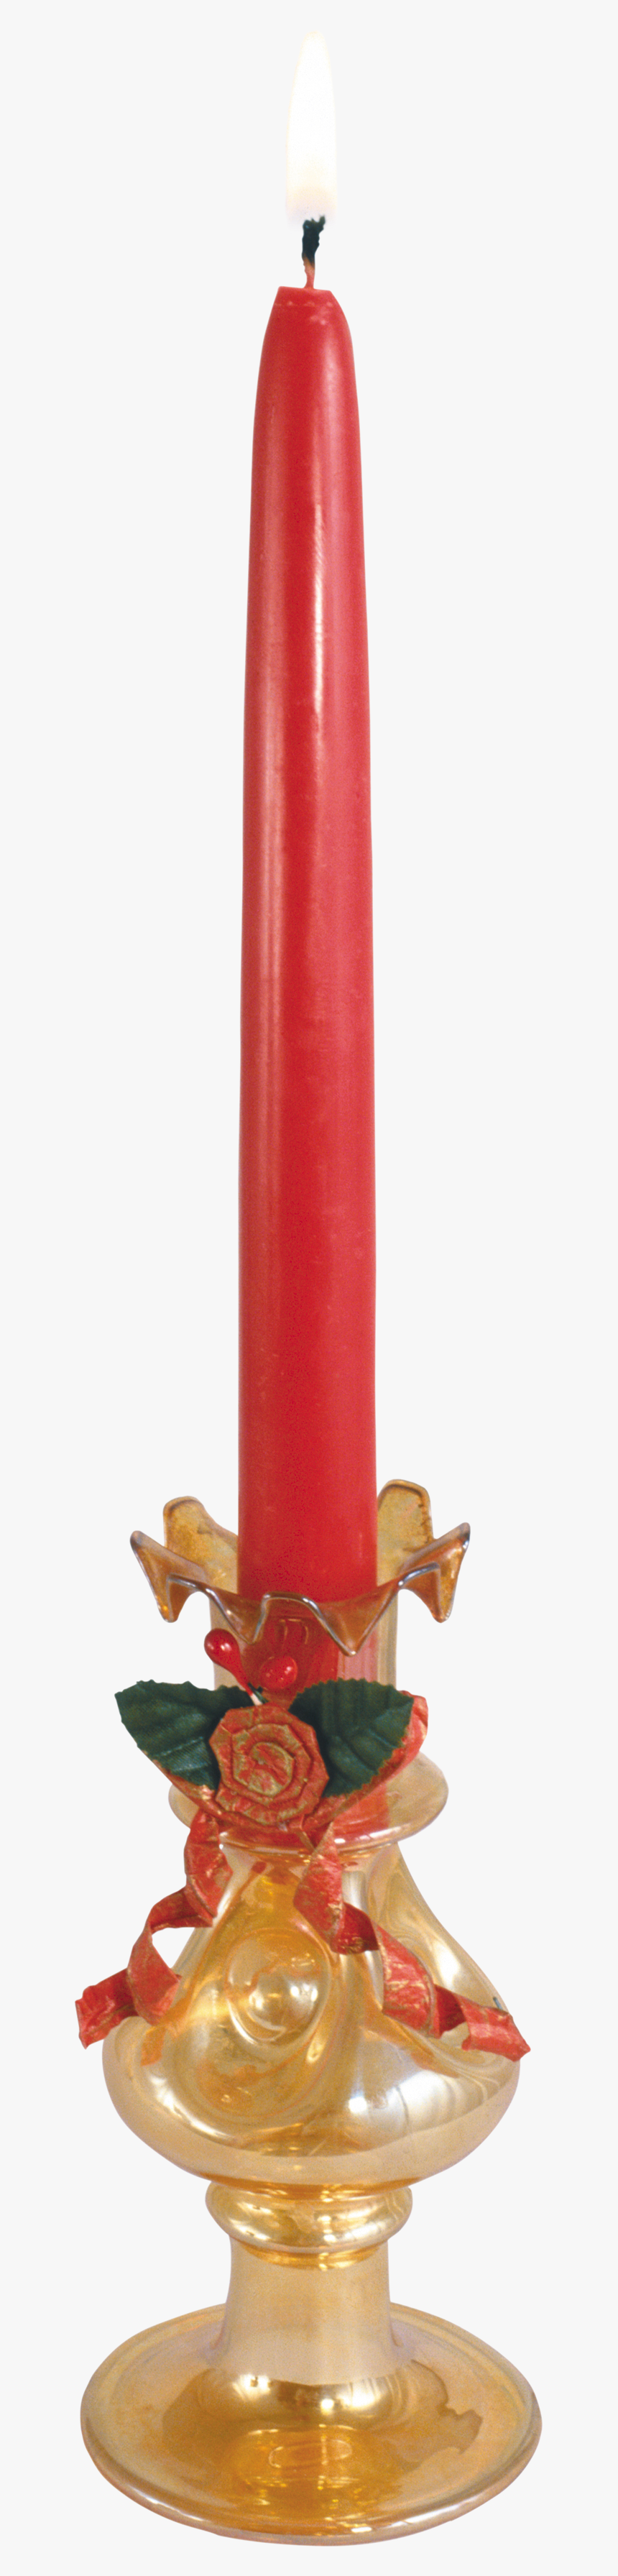 Red Candle Png, Transparent Png, Free Download